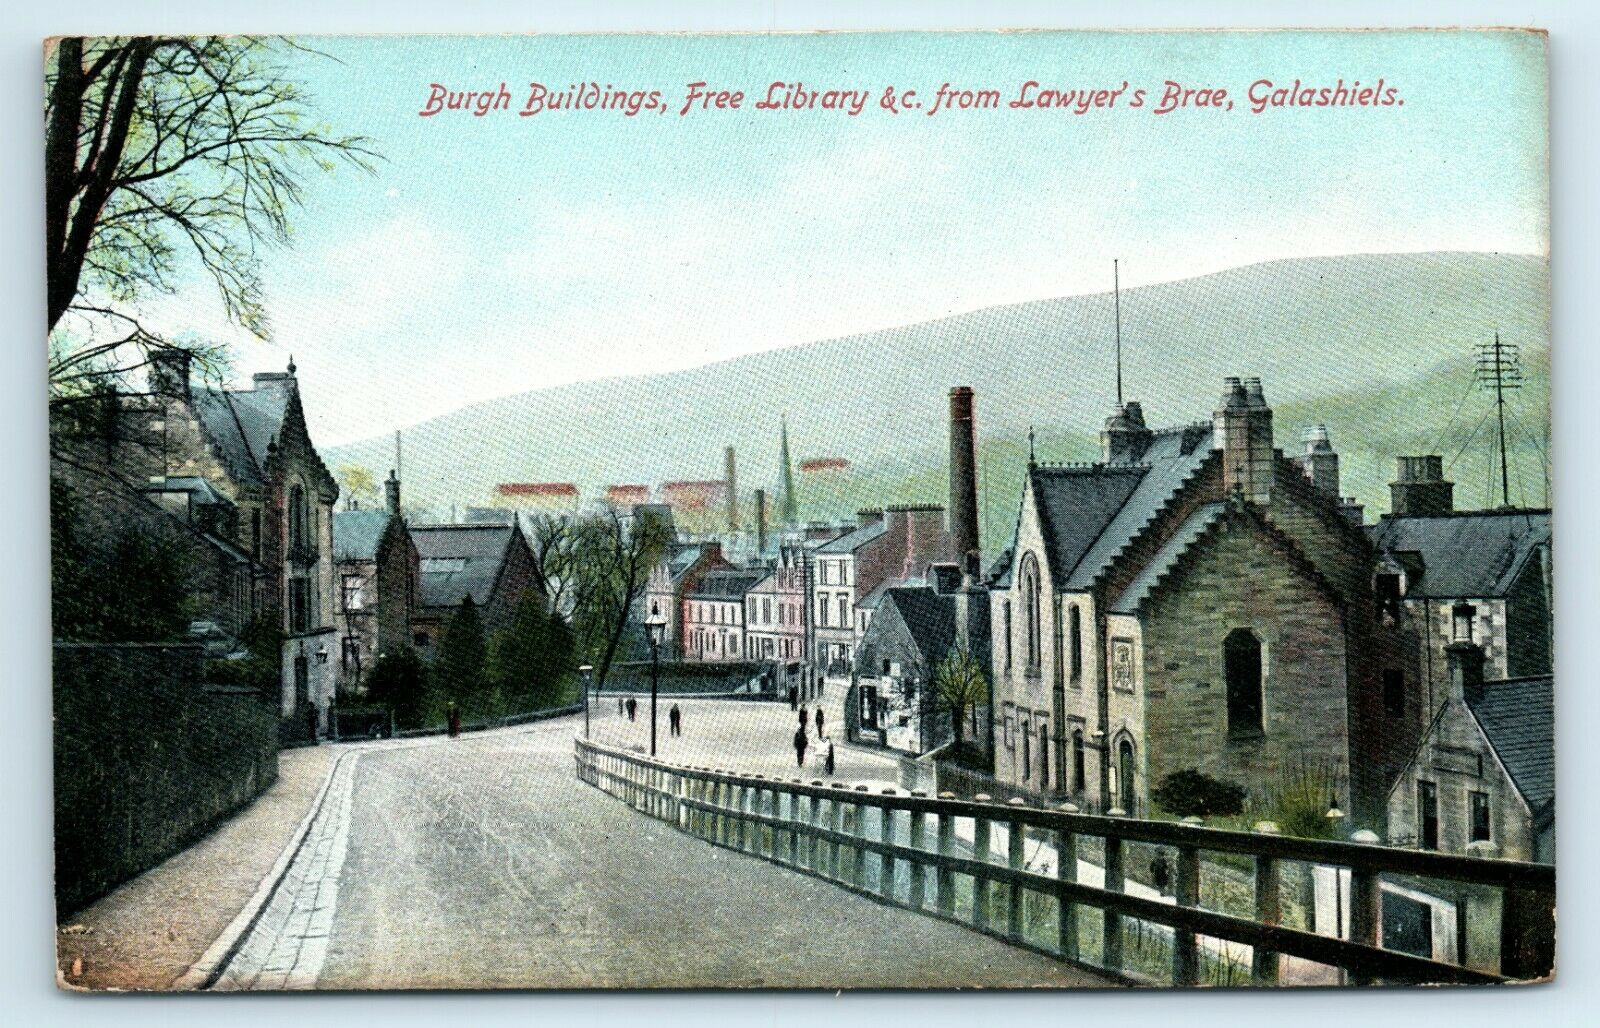 House Clearance - POSTCARD GALASHIELS BURGH BUILDINGS FREE LIBRARY LAWYERS BRAE